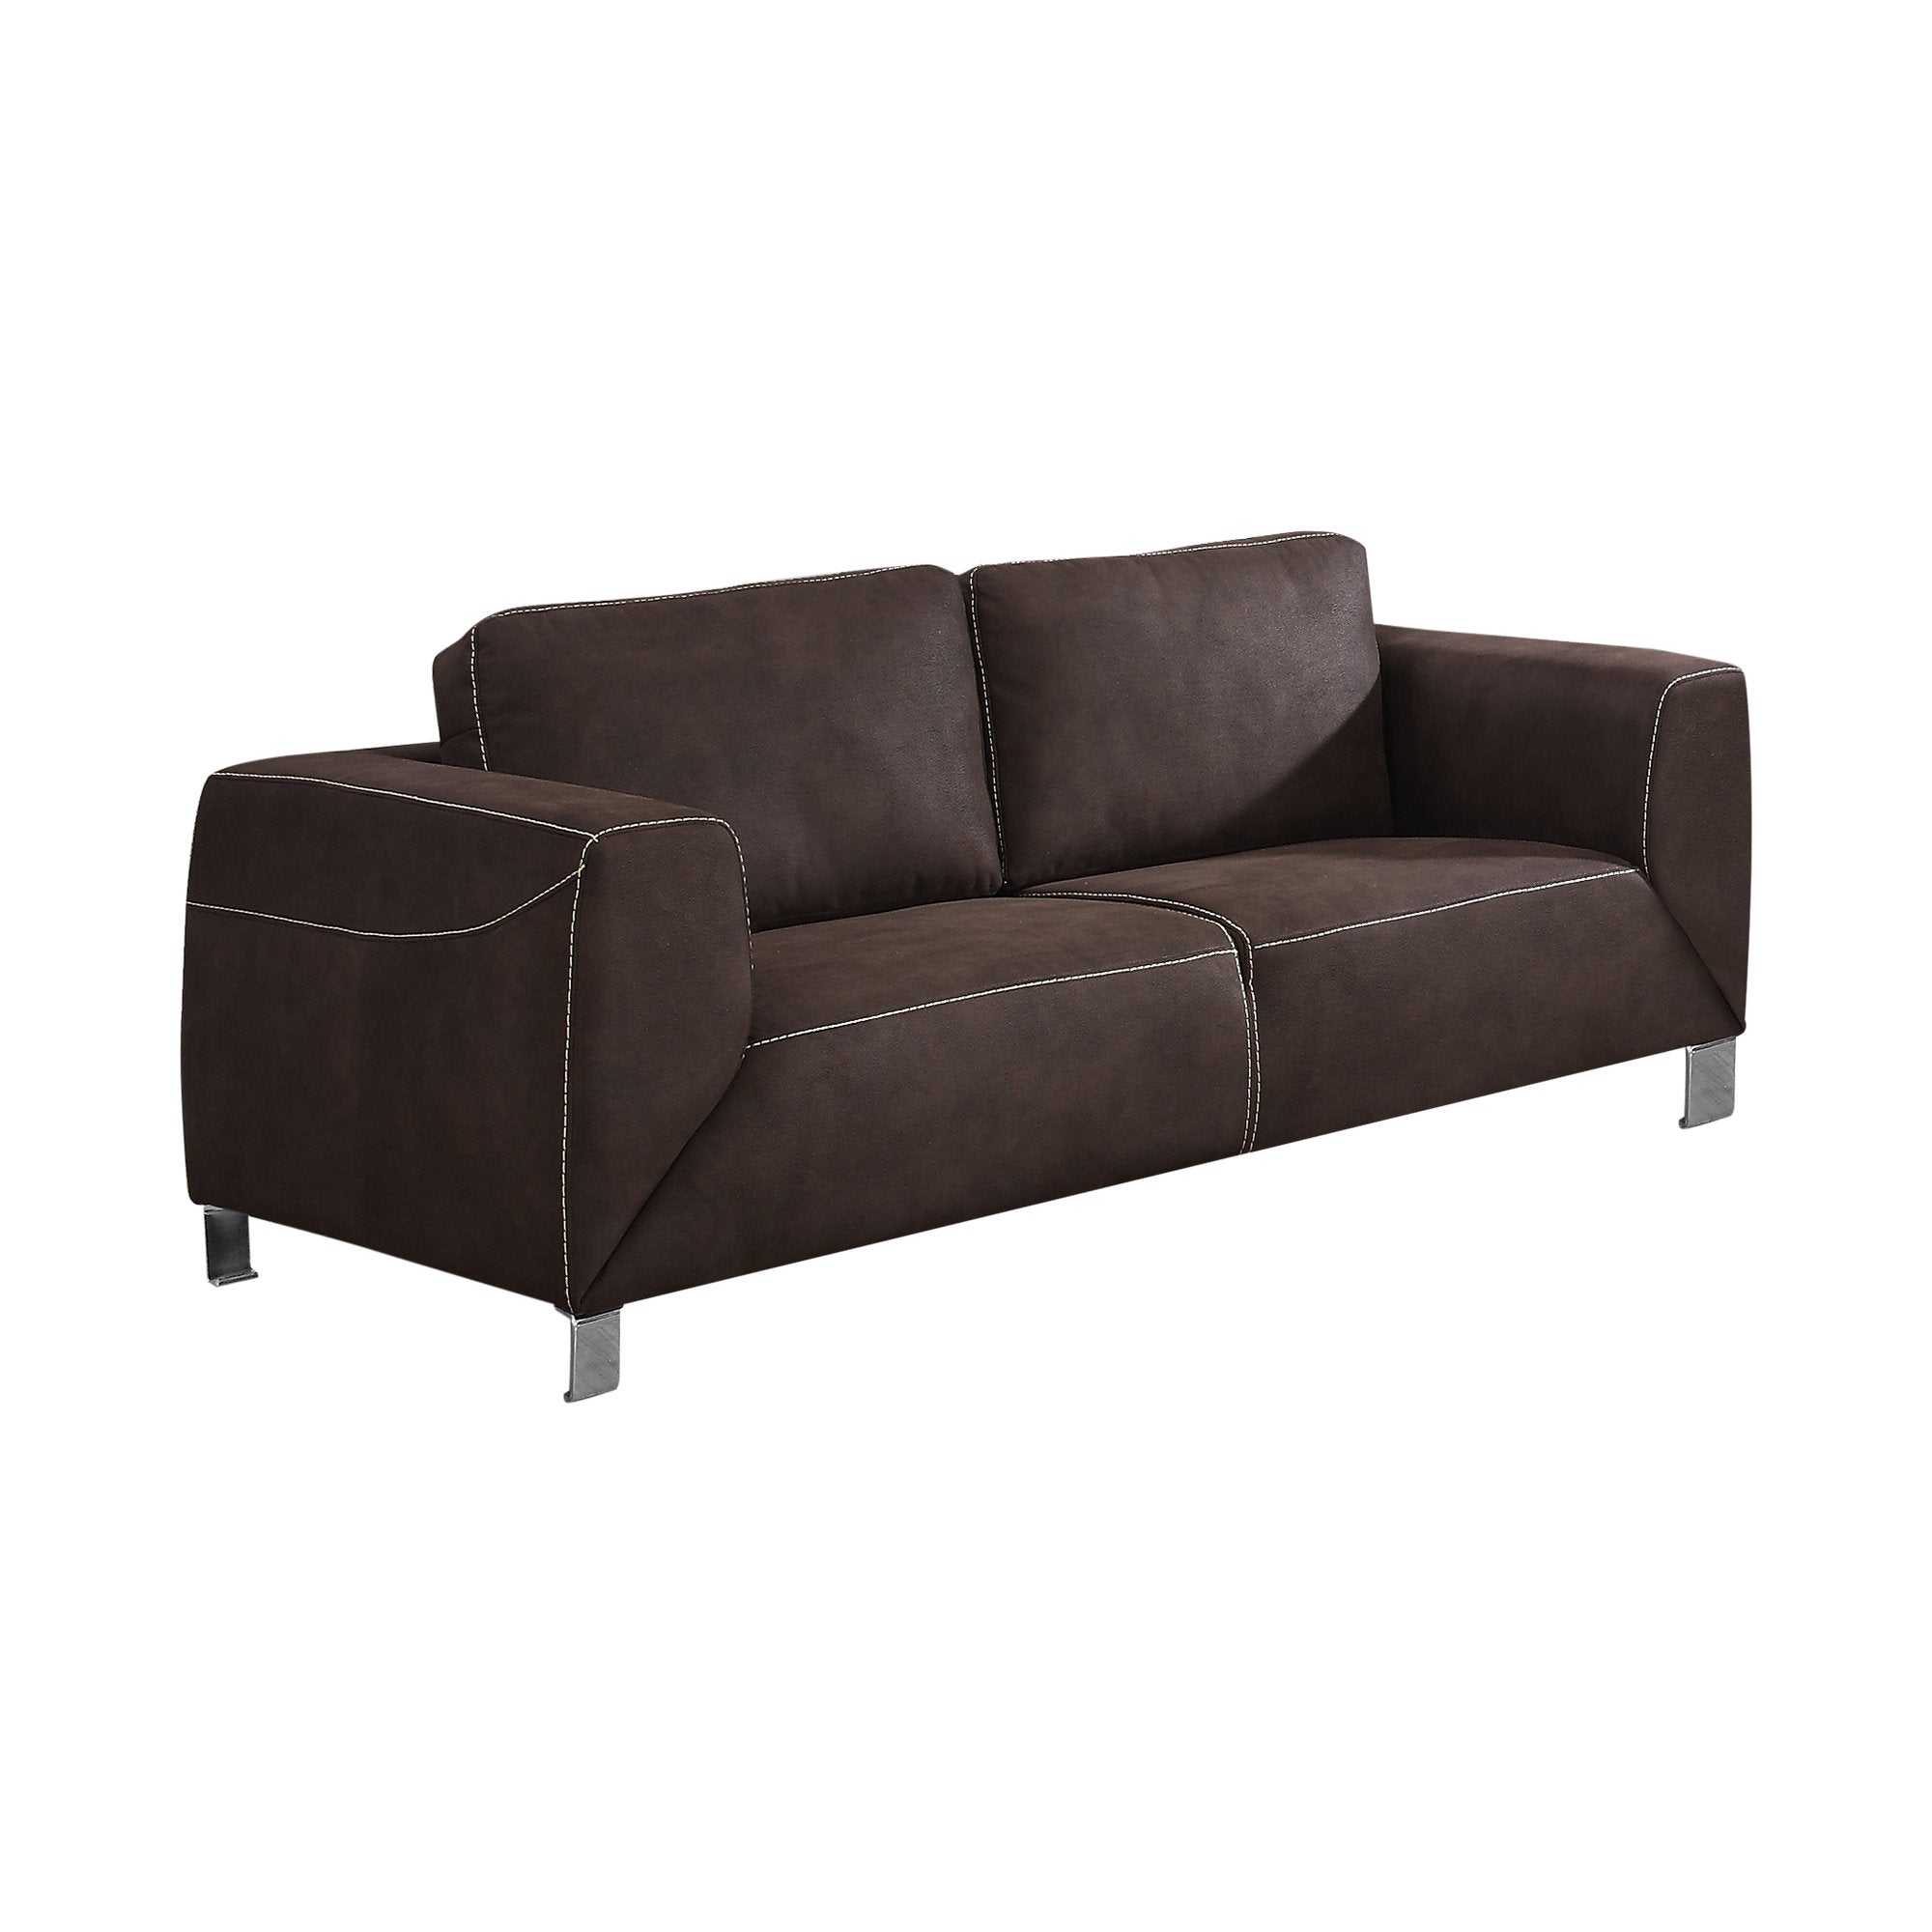 Love Seat - Chocolate Brown / Tan Contrast Micro-Suede